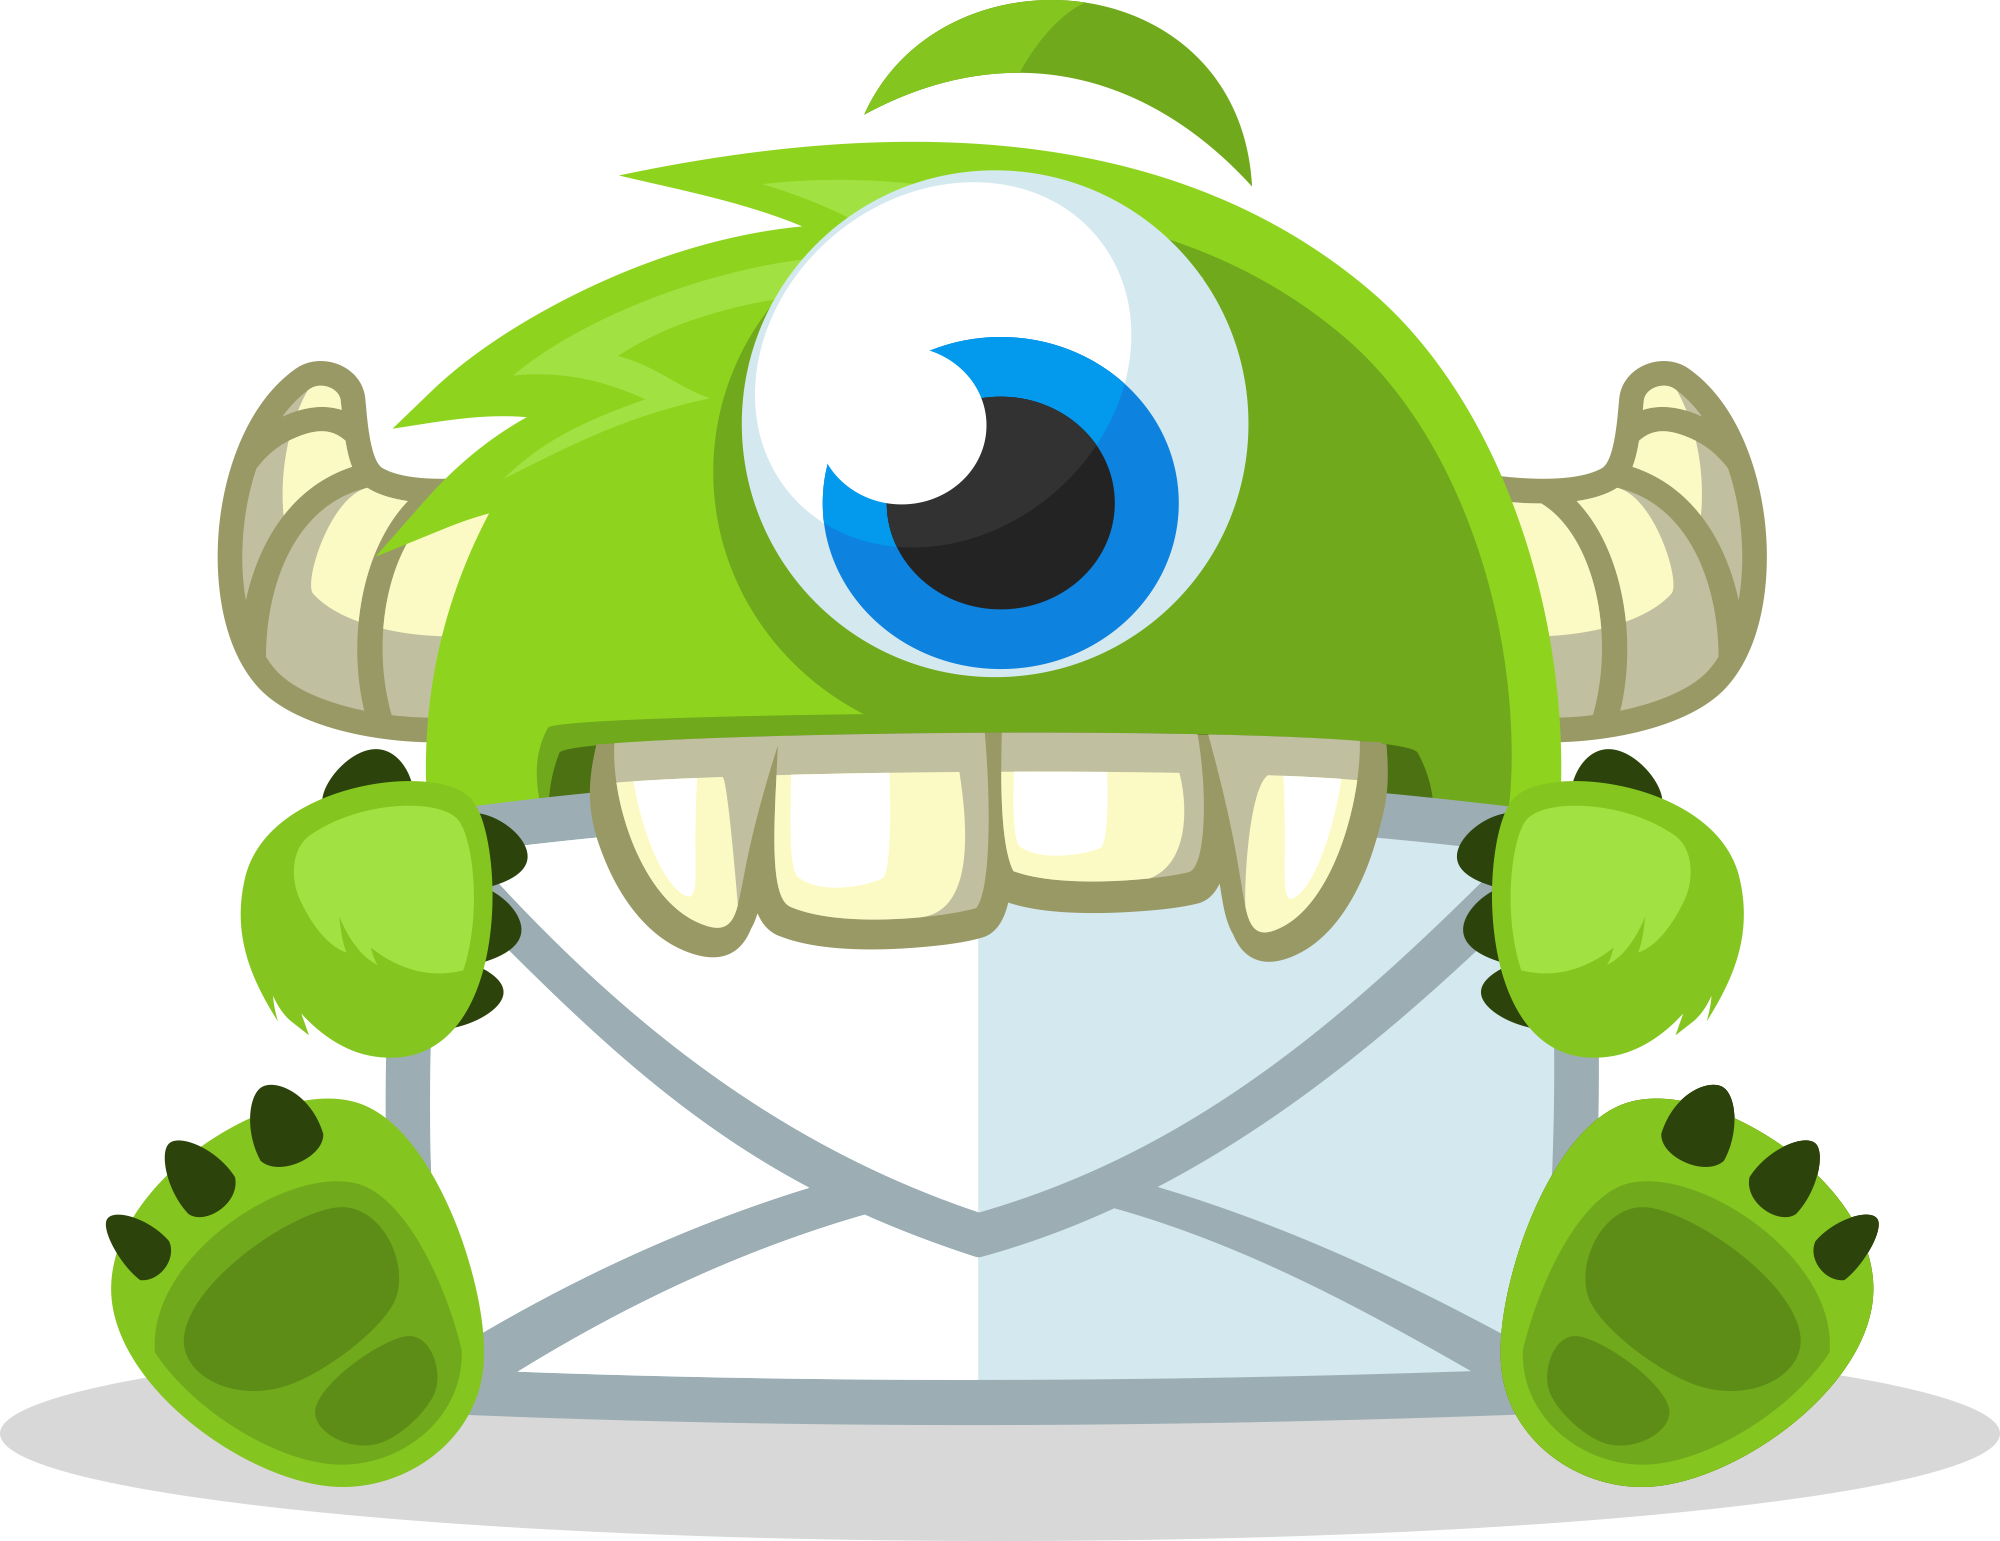 OptinMonster - Most Powerful Lead Generation Software for Marketers